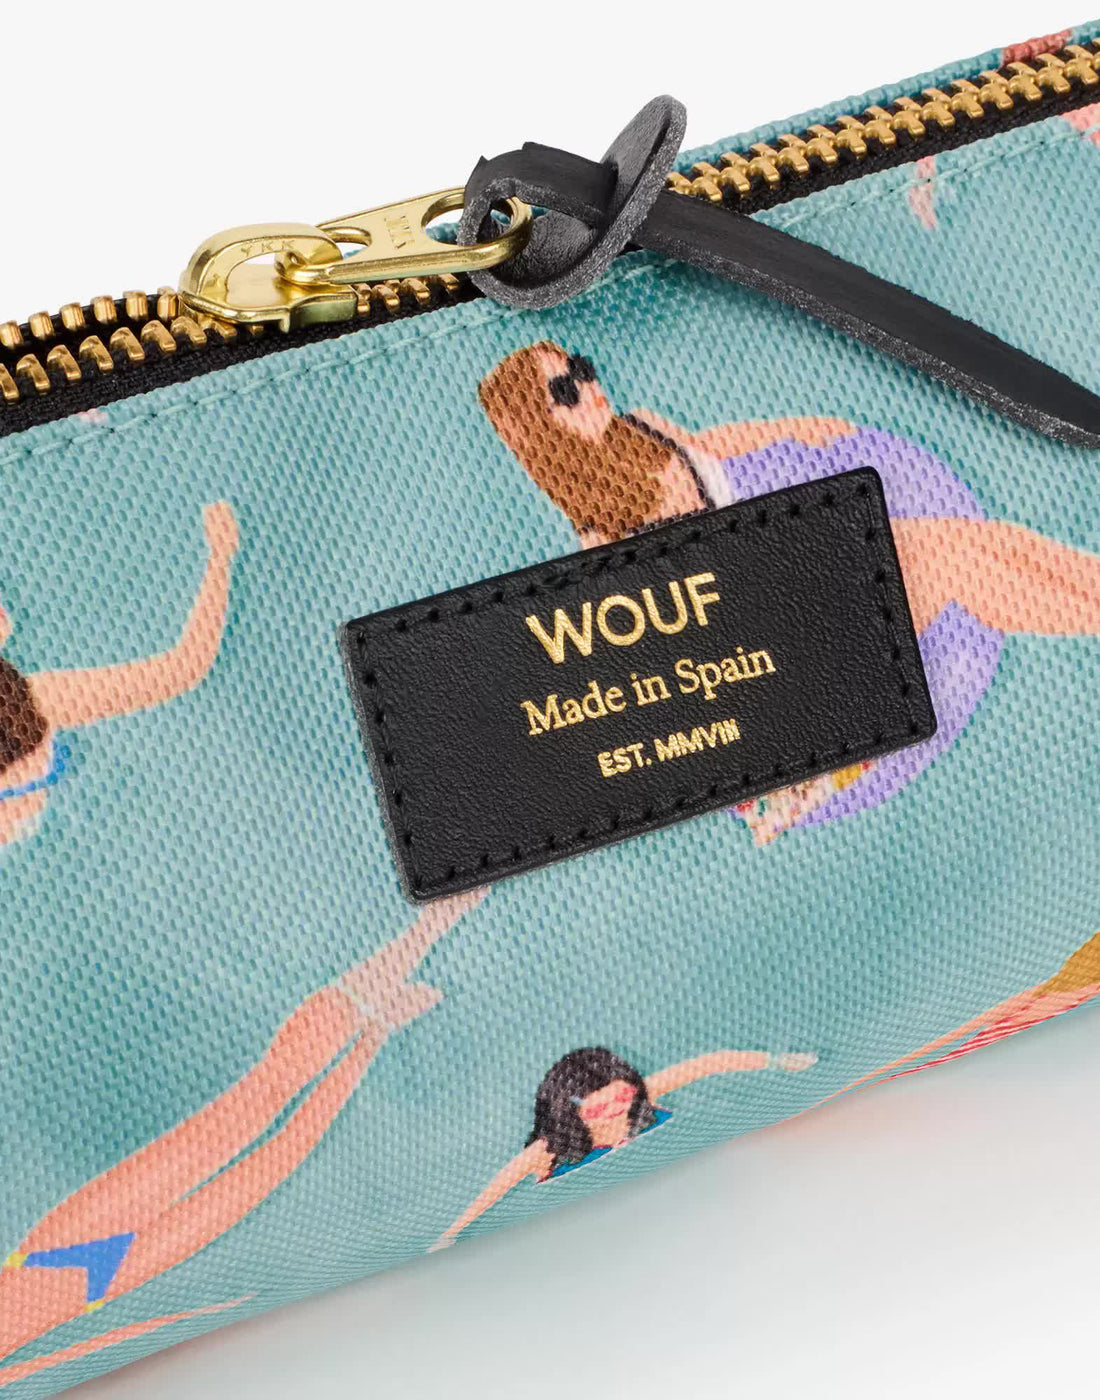 WOUF Swimmers School Pencil Case